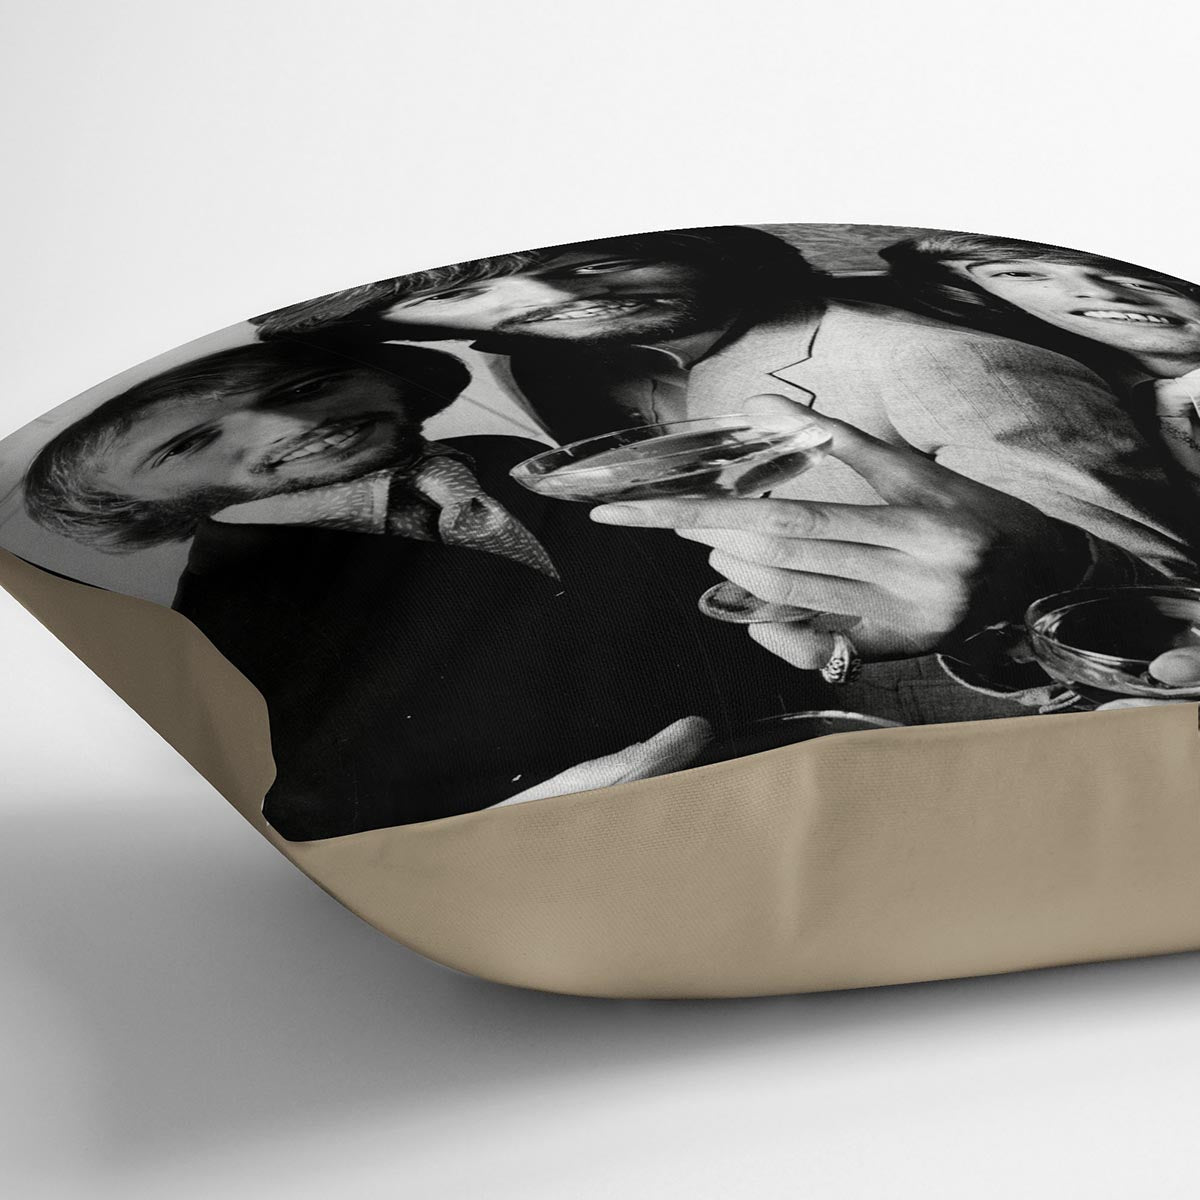 The Bee Gees Cushion